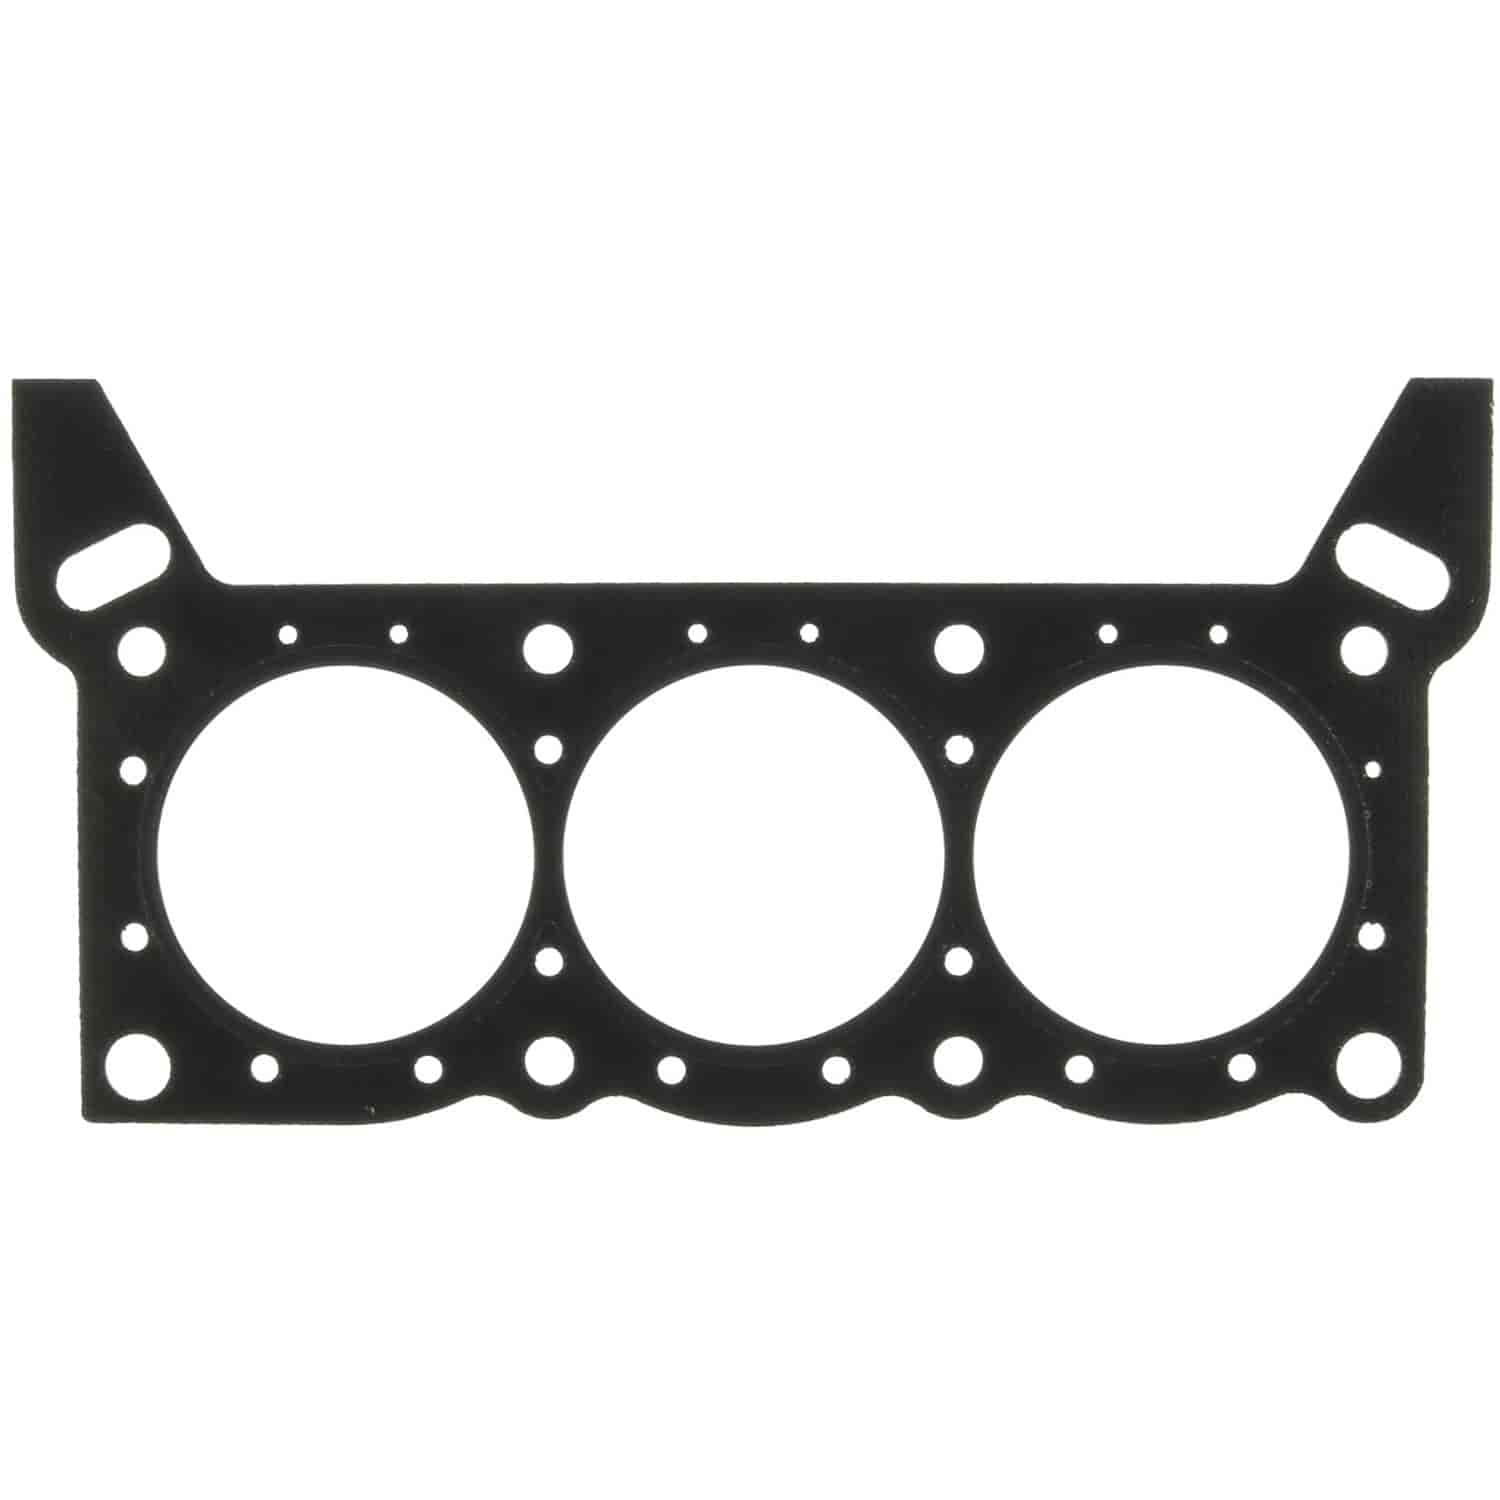 Cylinder Head Gasket Ford-Pass Linc Merc 232ci 3.8L Lincoln Continental Sable Taurus 88-92